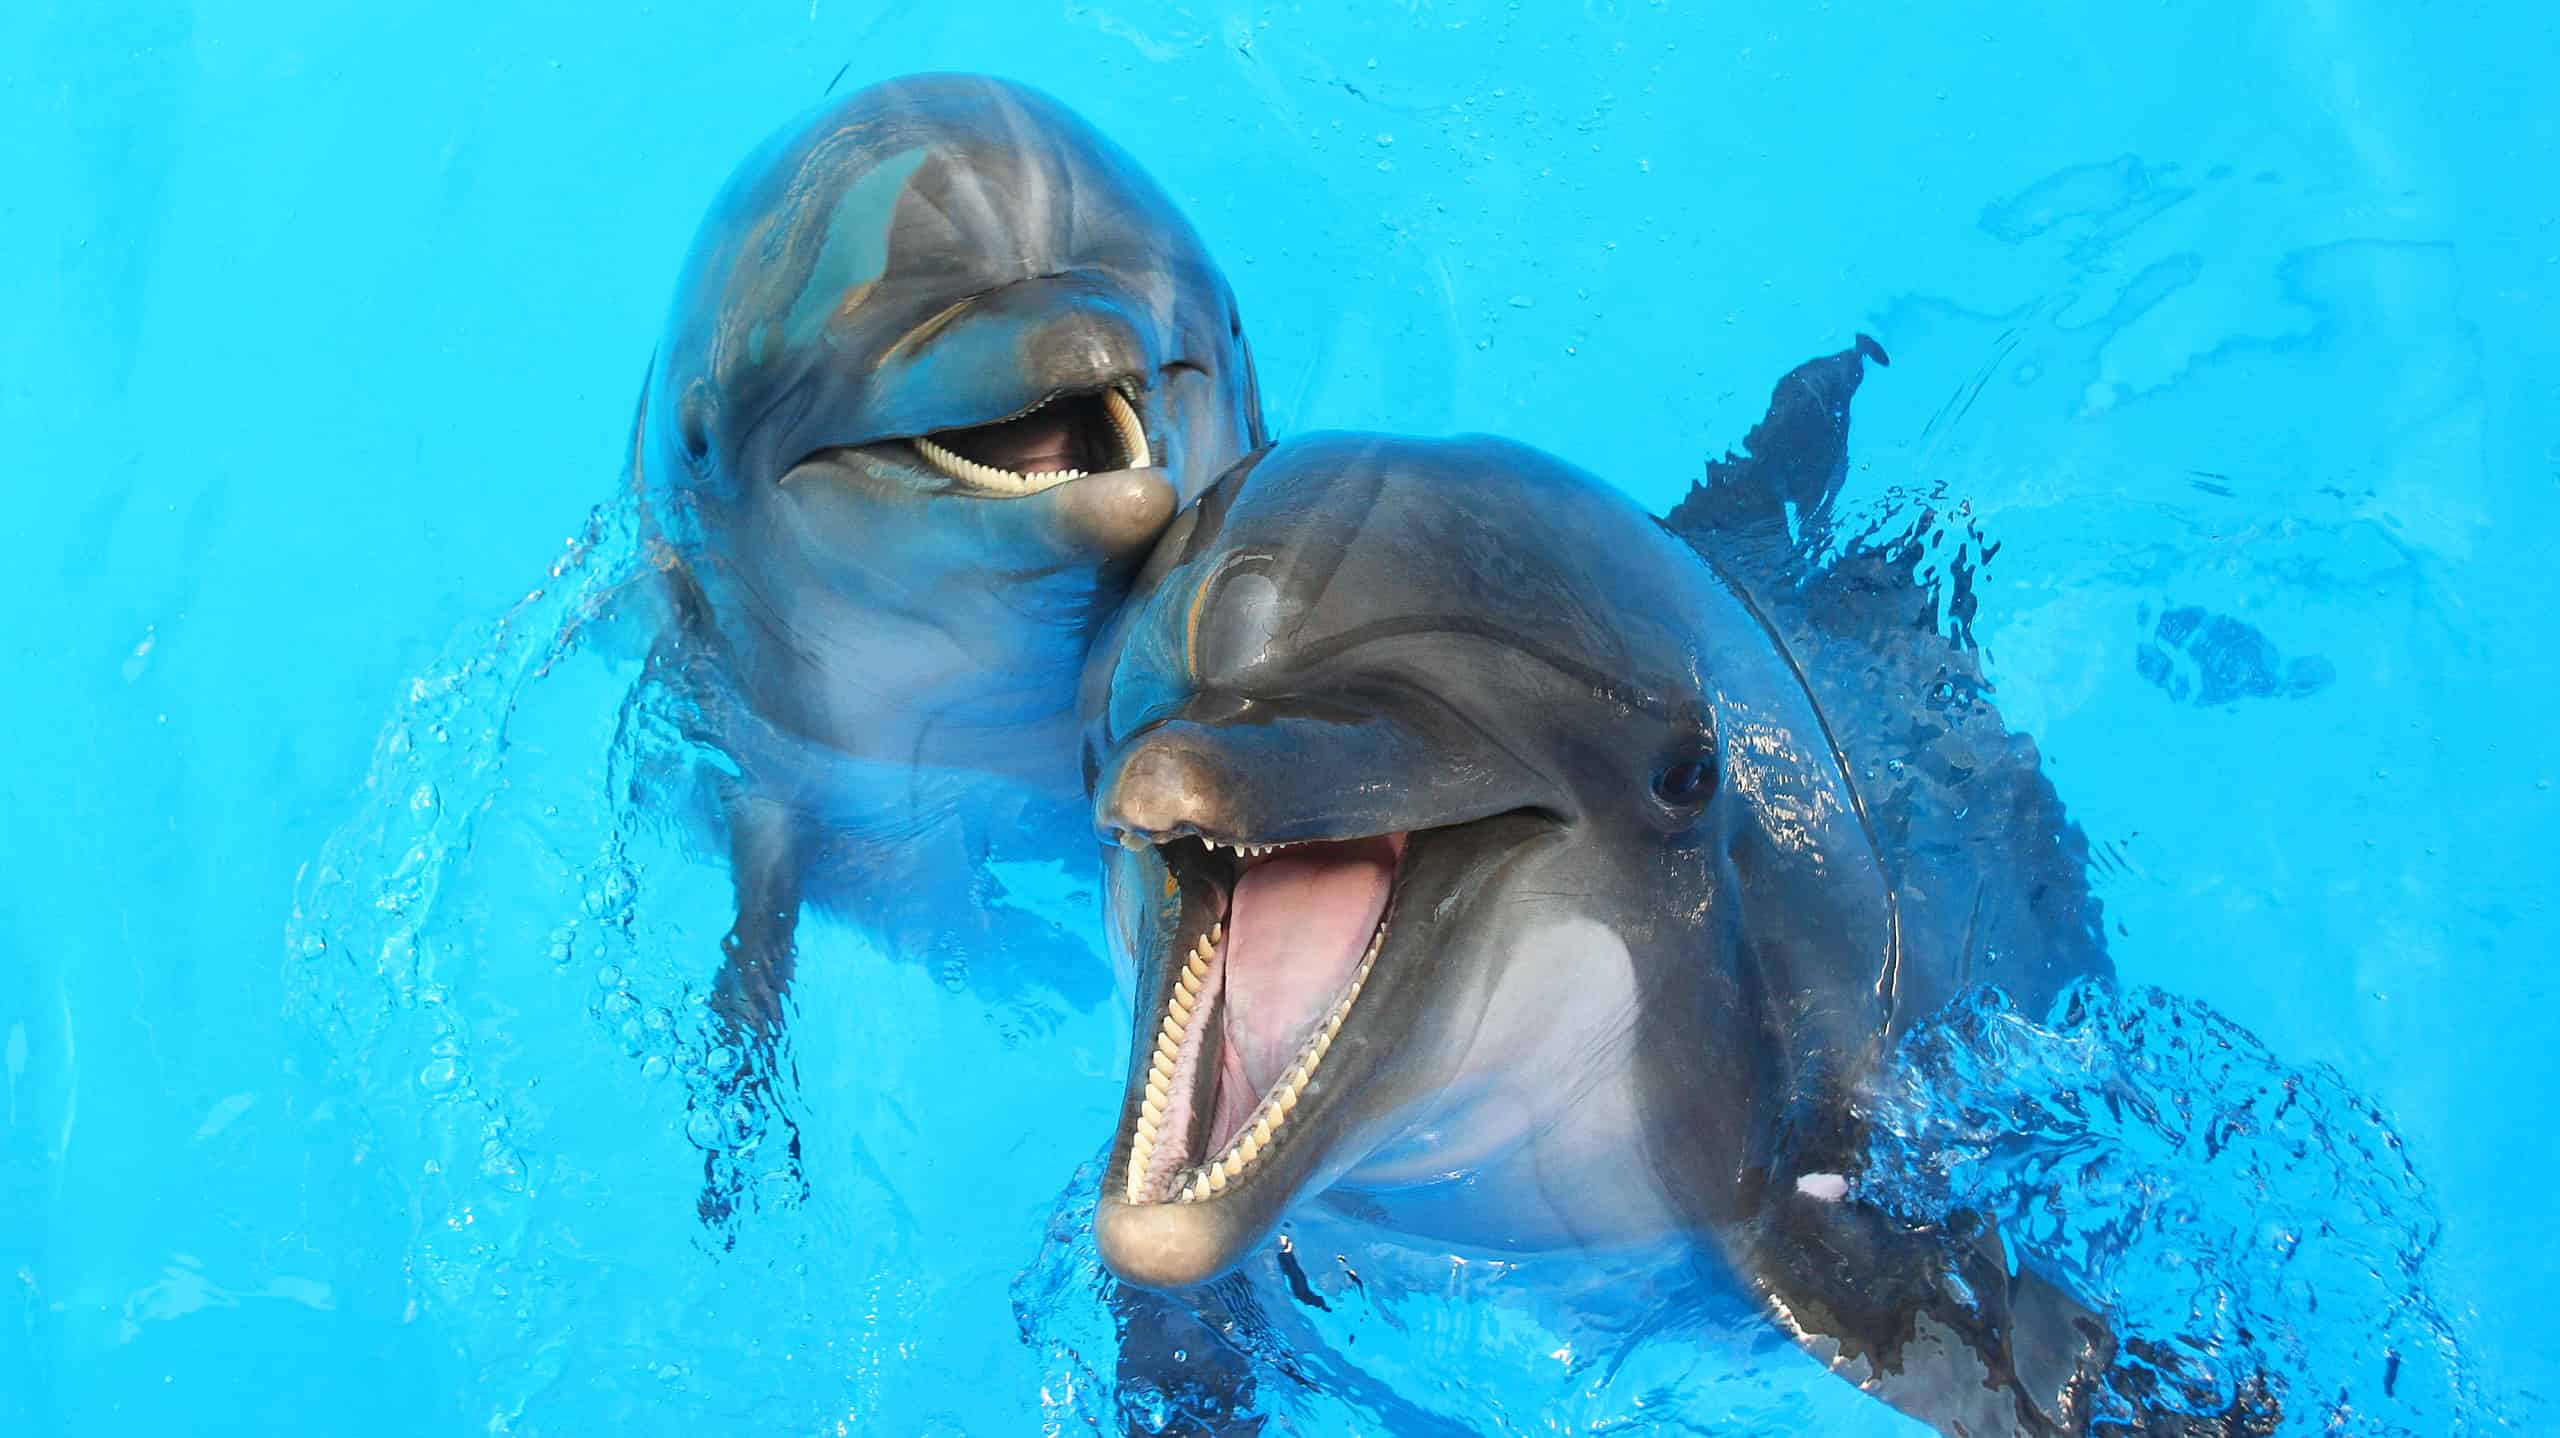 Two dolphins swim in the pool. The dolphins are gray and their mouths are open. The water is swimming pool blue.